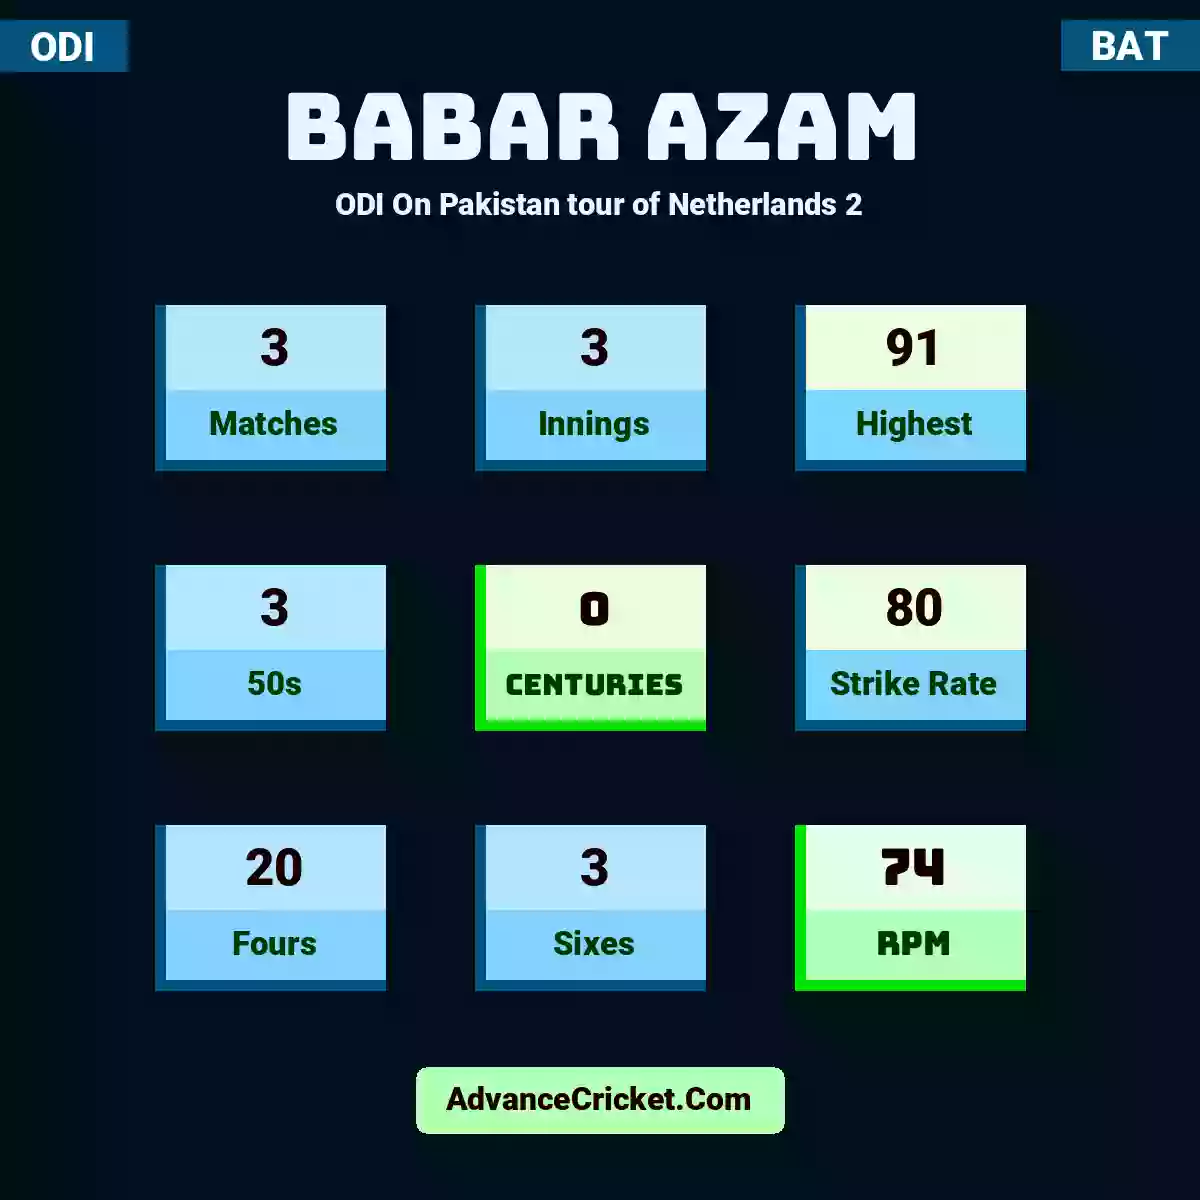 Babar Azam ODI  On Pakistan tour of Netherlands 2, Babar Azam played 3 matches, scored 91 runs as highest, 3 half-centuries, and 0 centuries, with a strike rate of 80. B.Azam hit 20 fours and 3 sixes, with an RPM of 74.